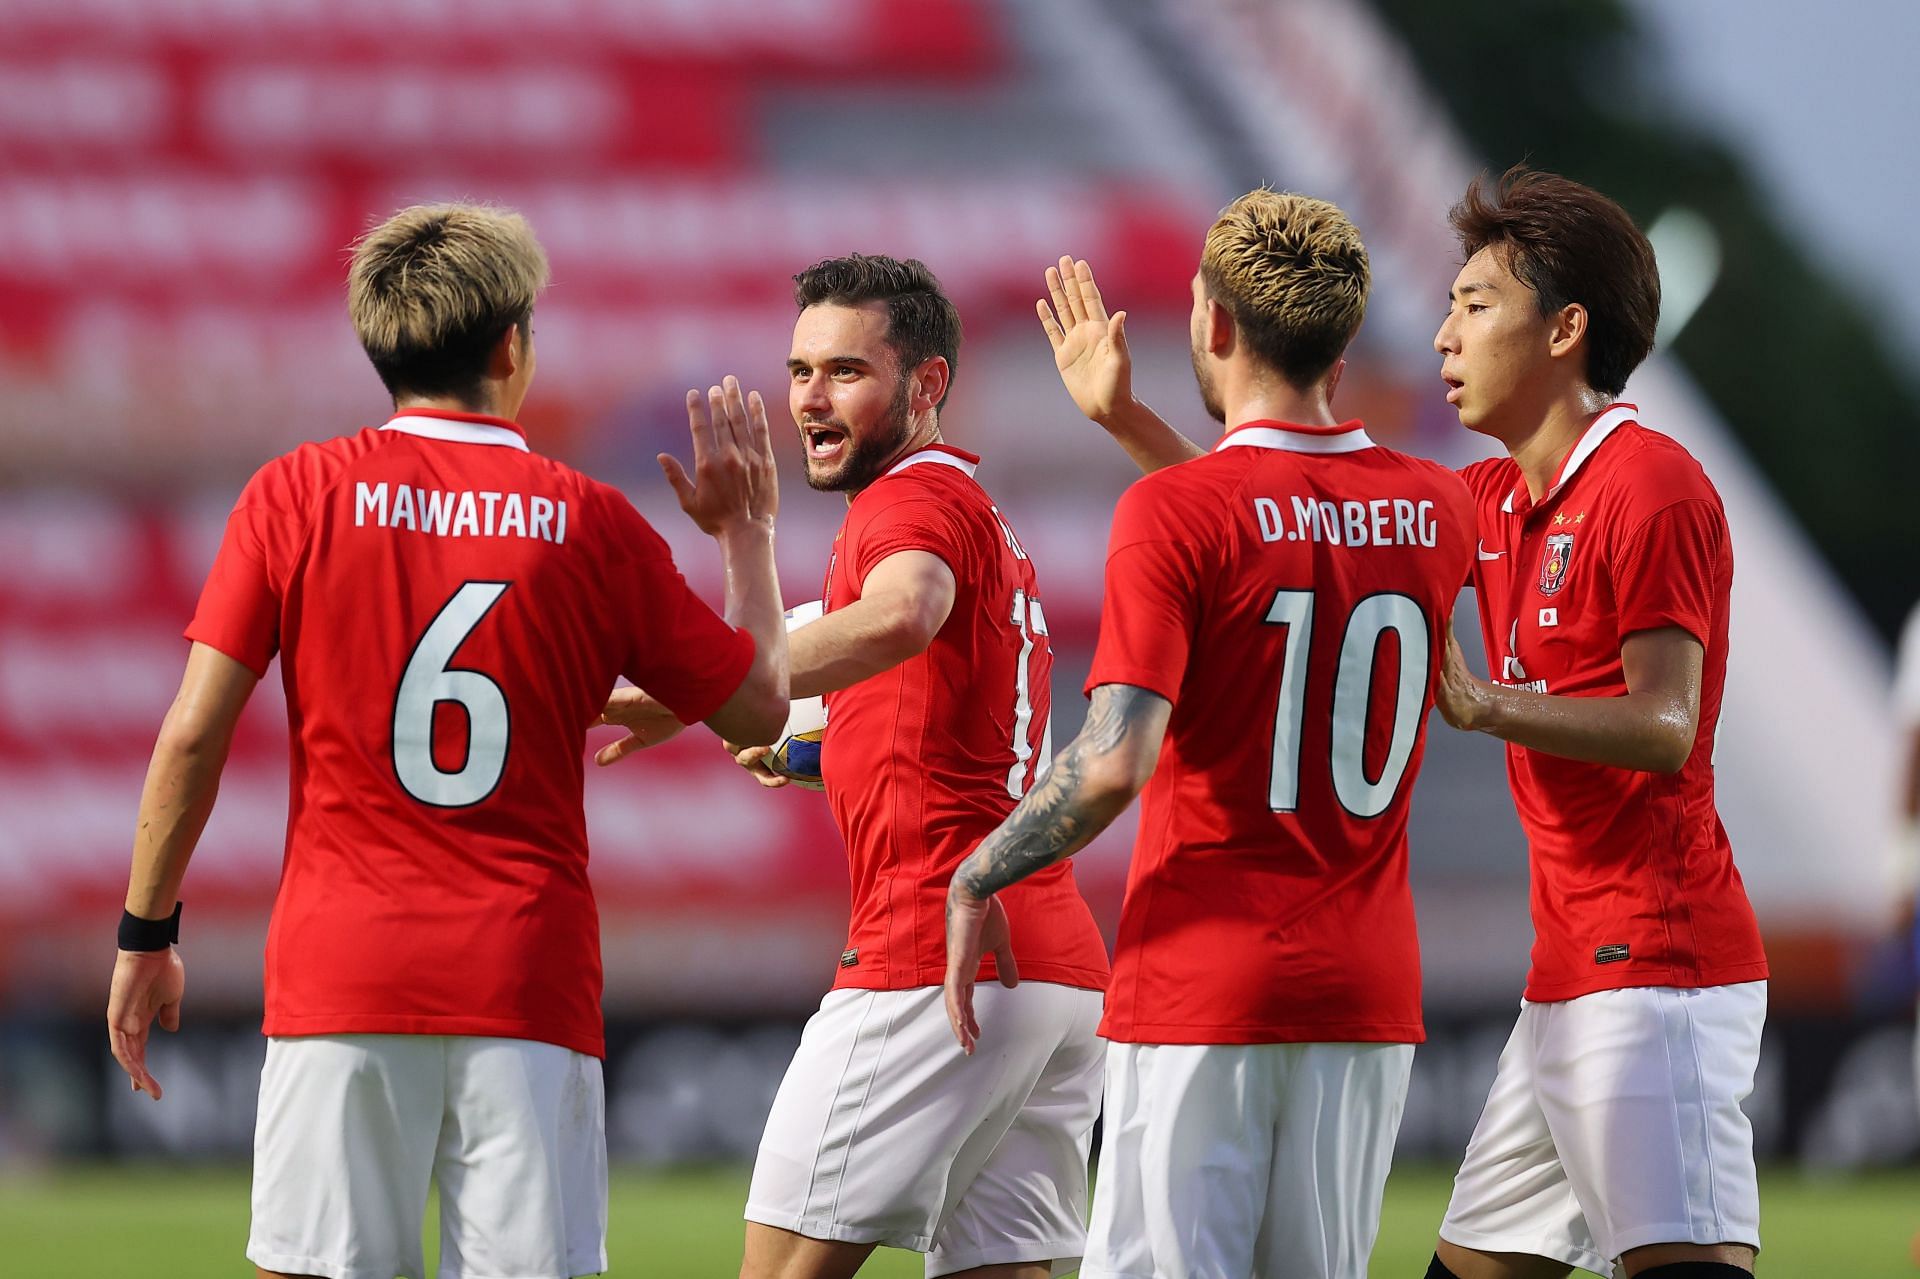 Urawa Reds face Shimizu S-Pulse in their upcoming J1 League fixture on Saturday